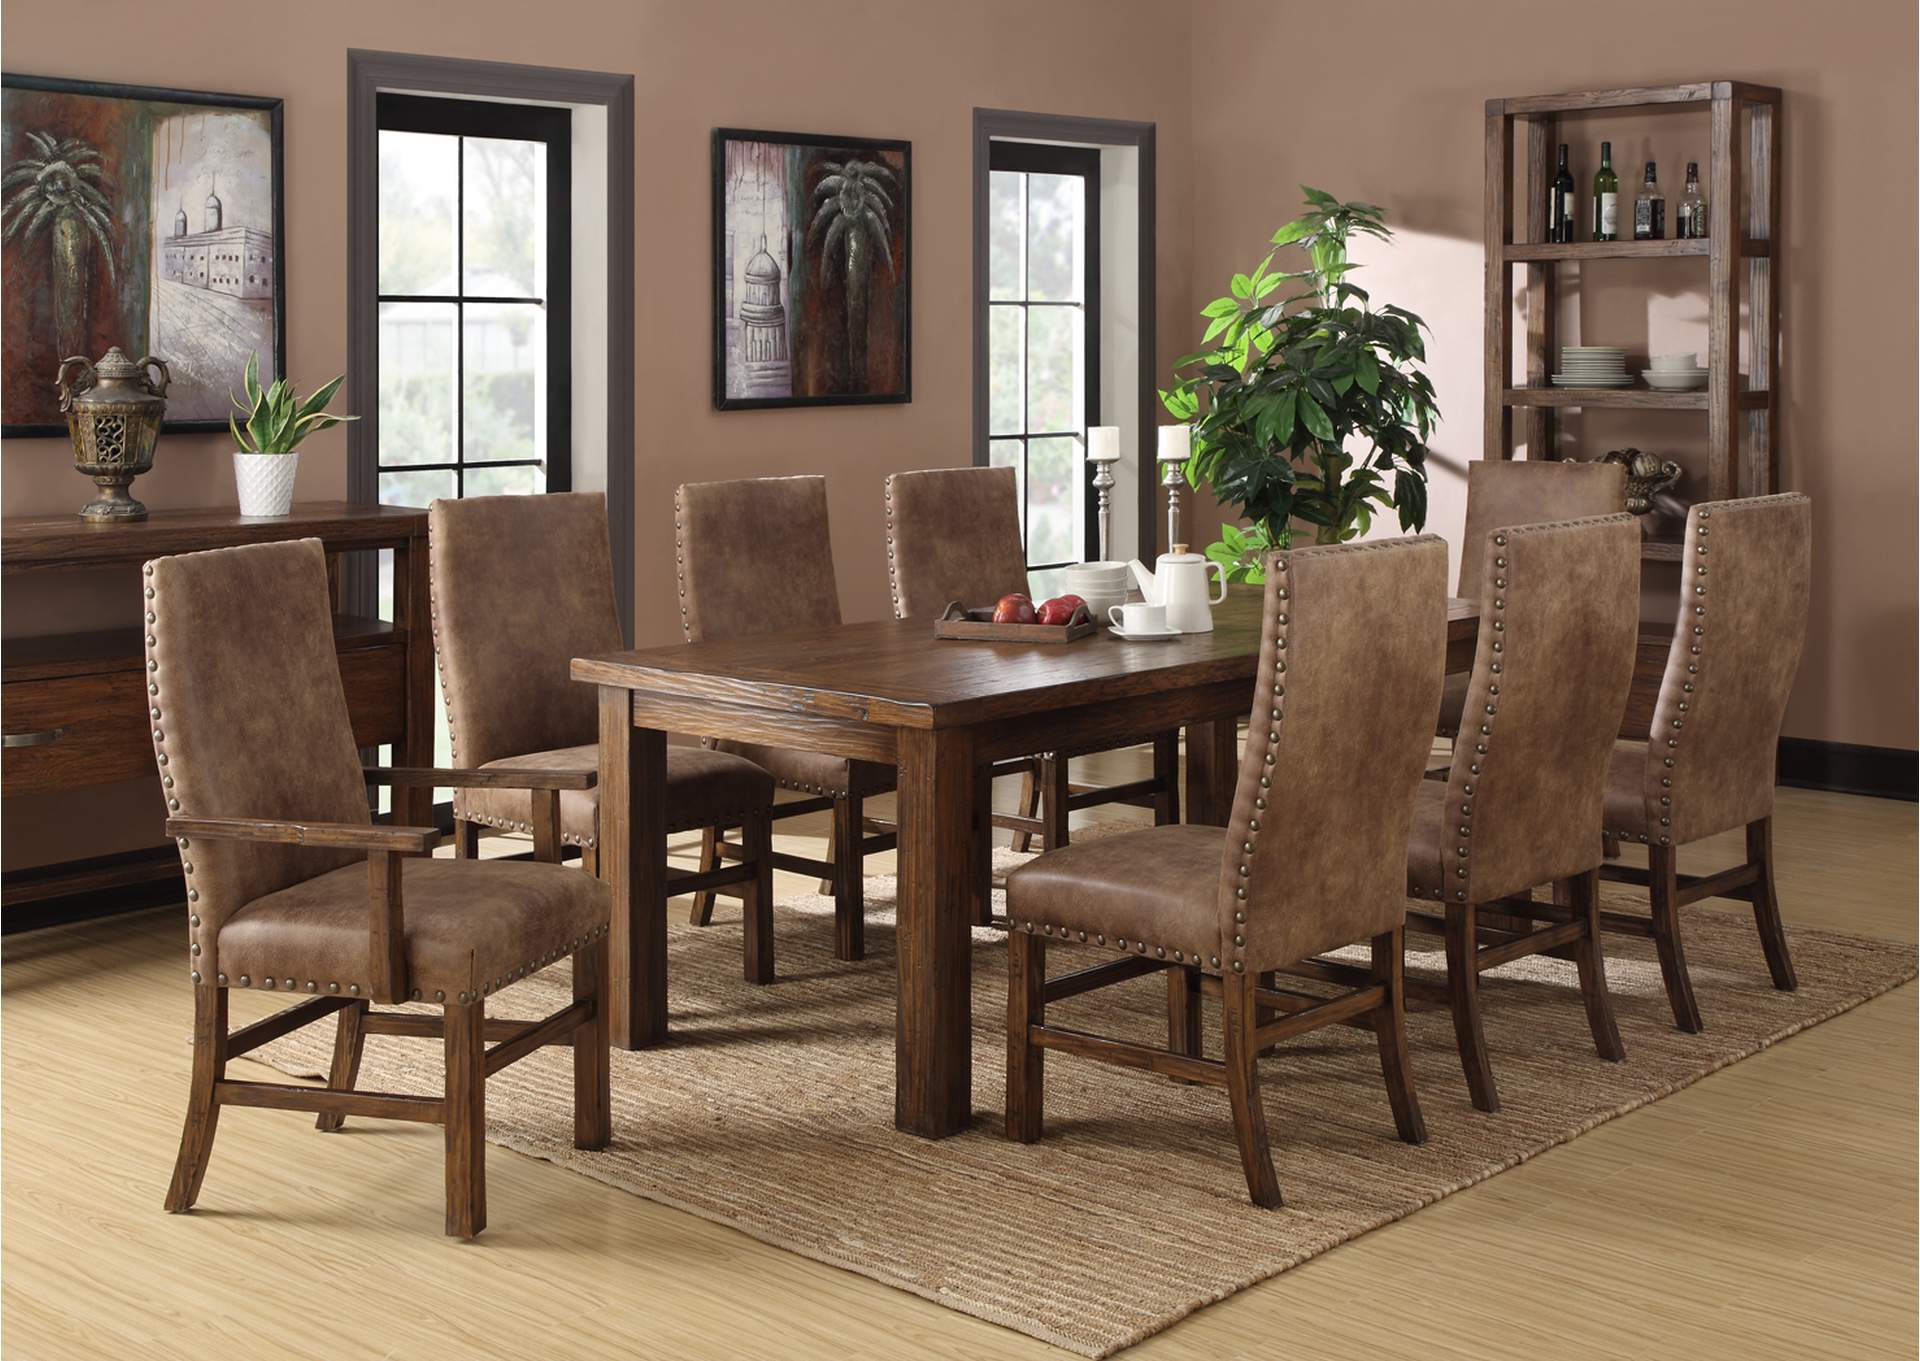 Chambers Creek Rustic Pine Upholstered, Rustic Upholstered Dining Room Chairs